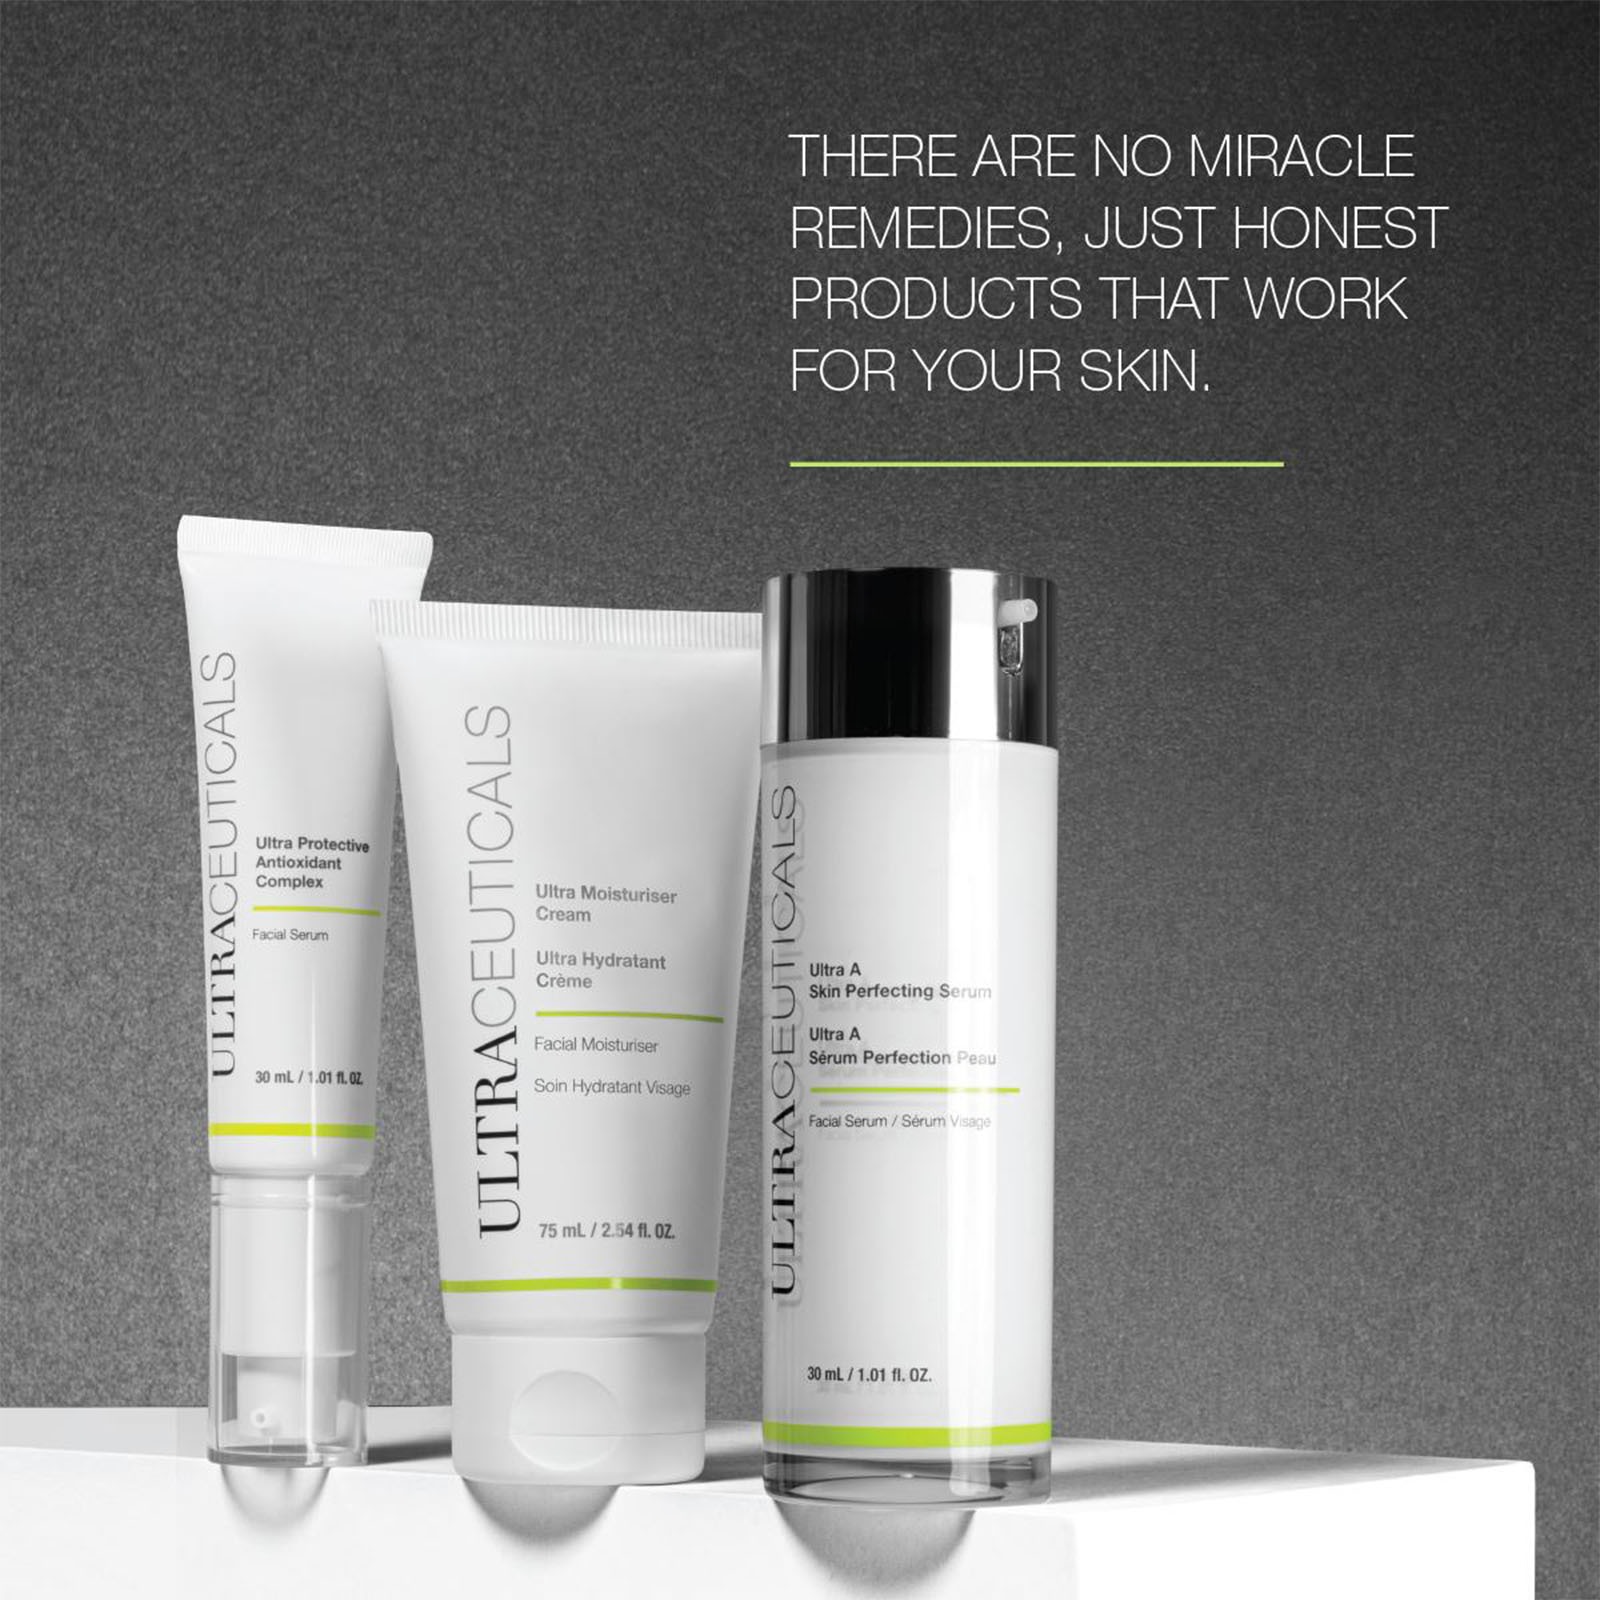 ultraceuticals_0001_Honest products that work for your skin